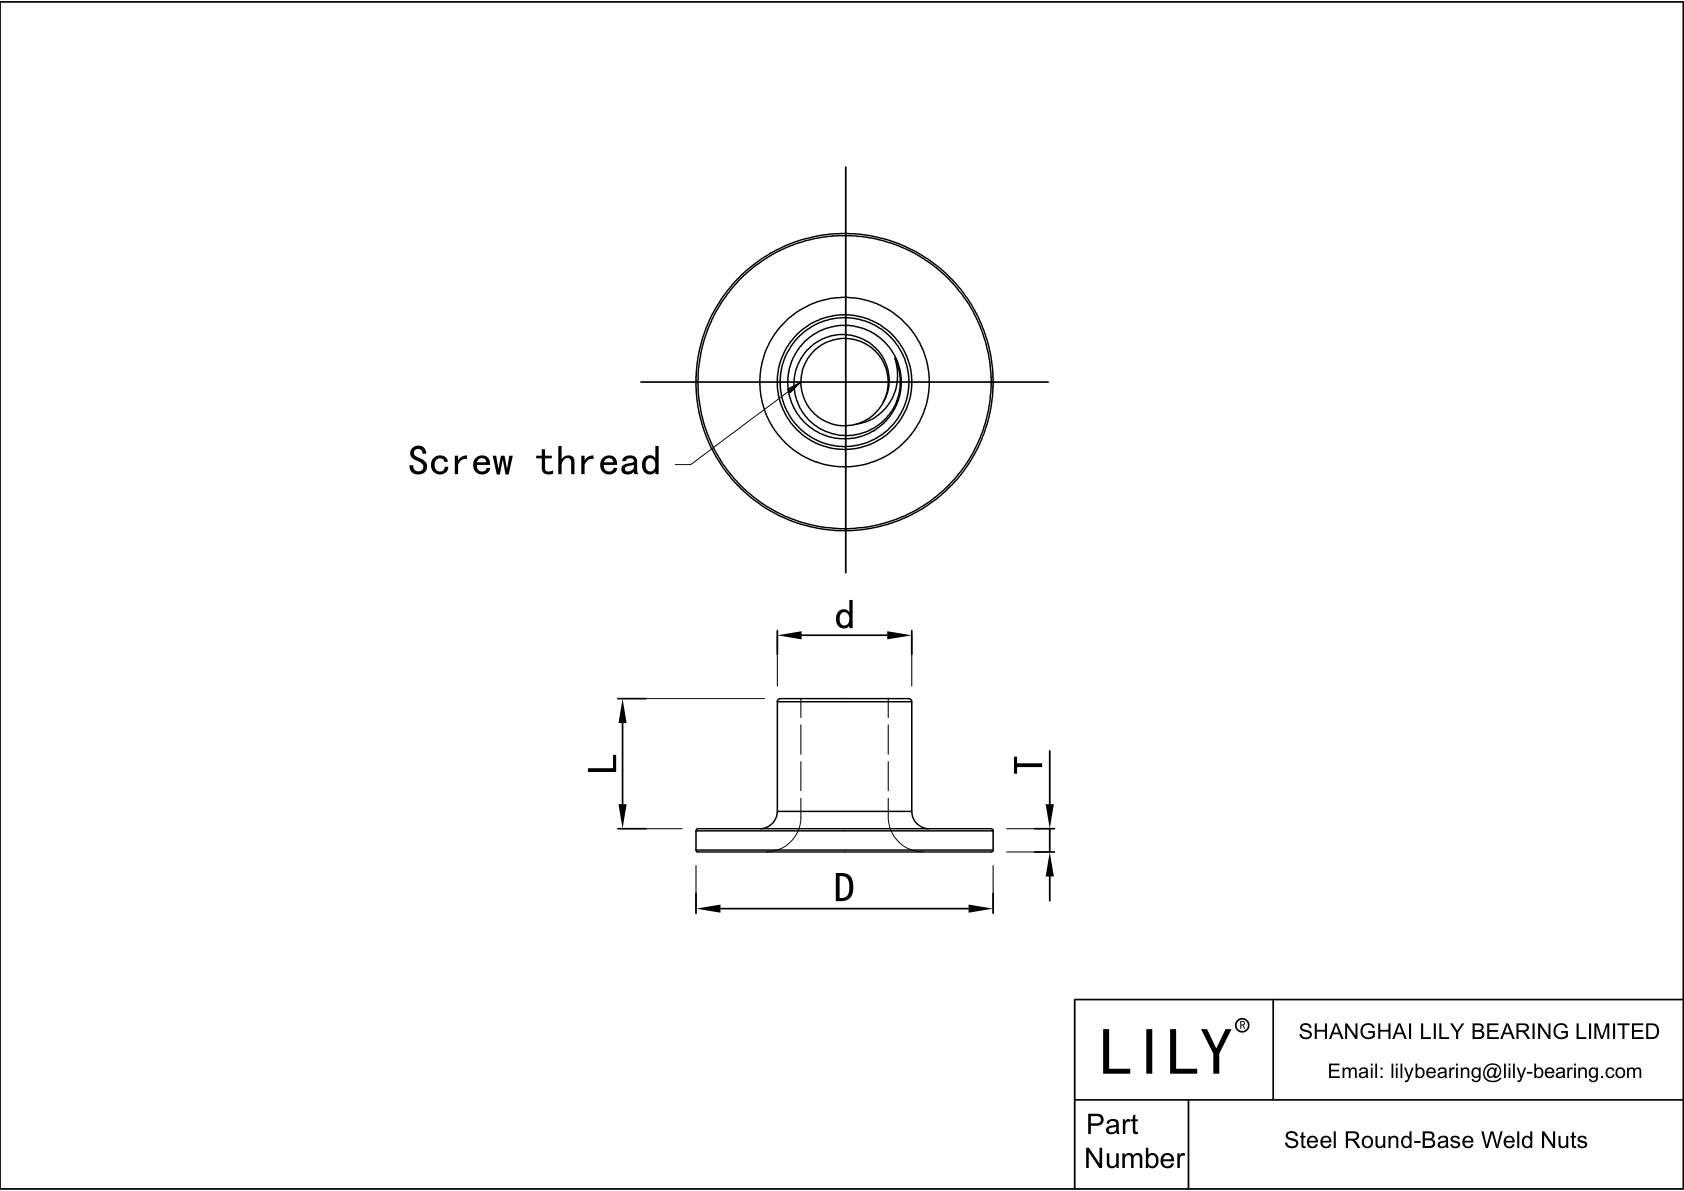 90596A025 | Steel Round-Base Weld Nuts | Lily Bearing